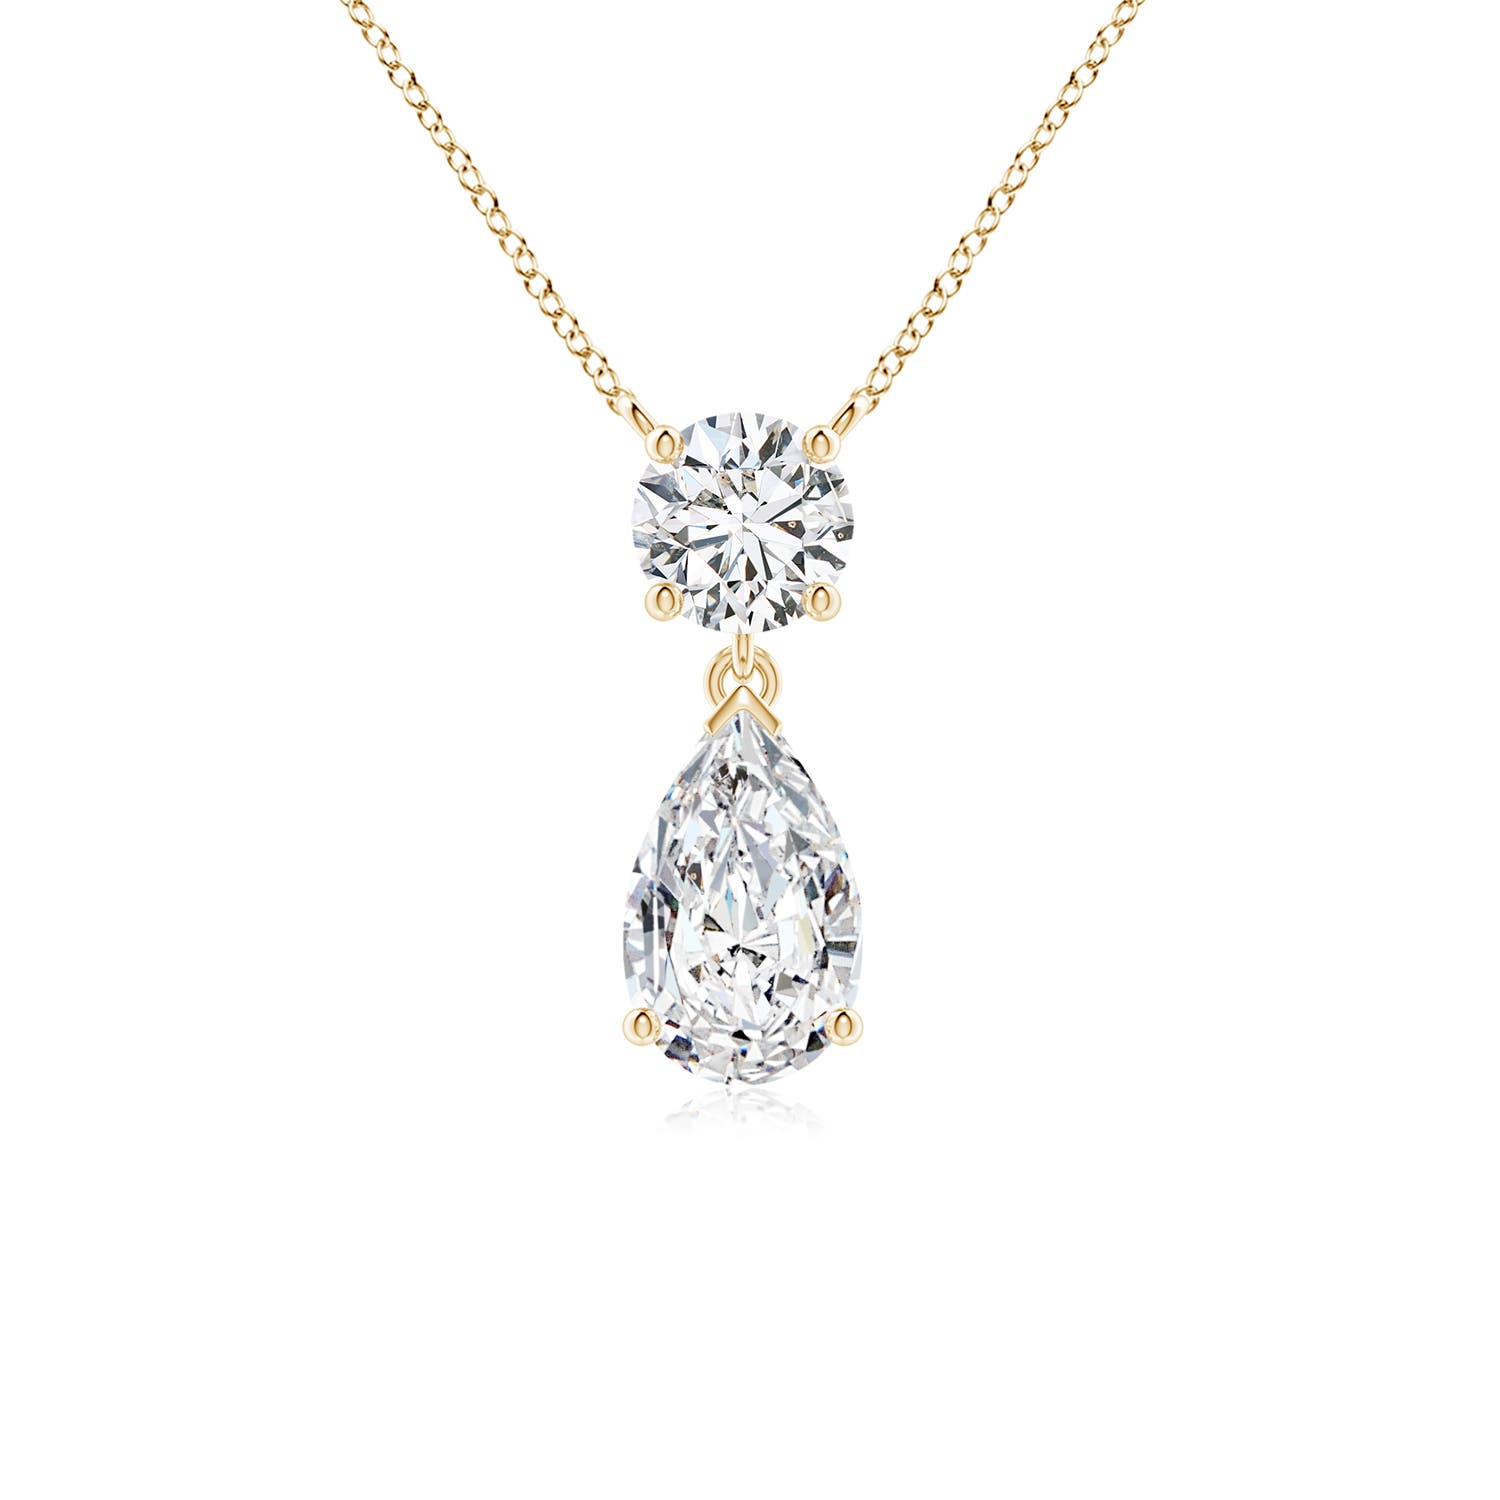 H, SI2 / 1.5 CT / 14 KT Yellow Gold